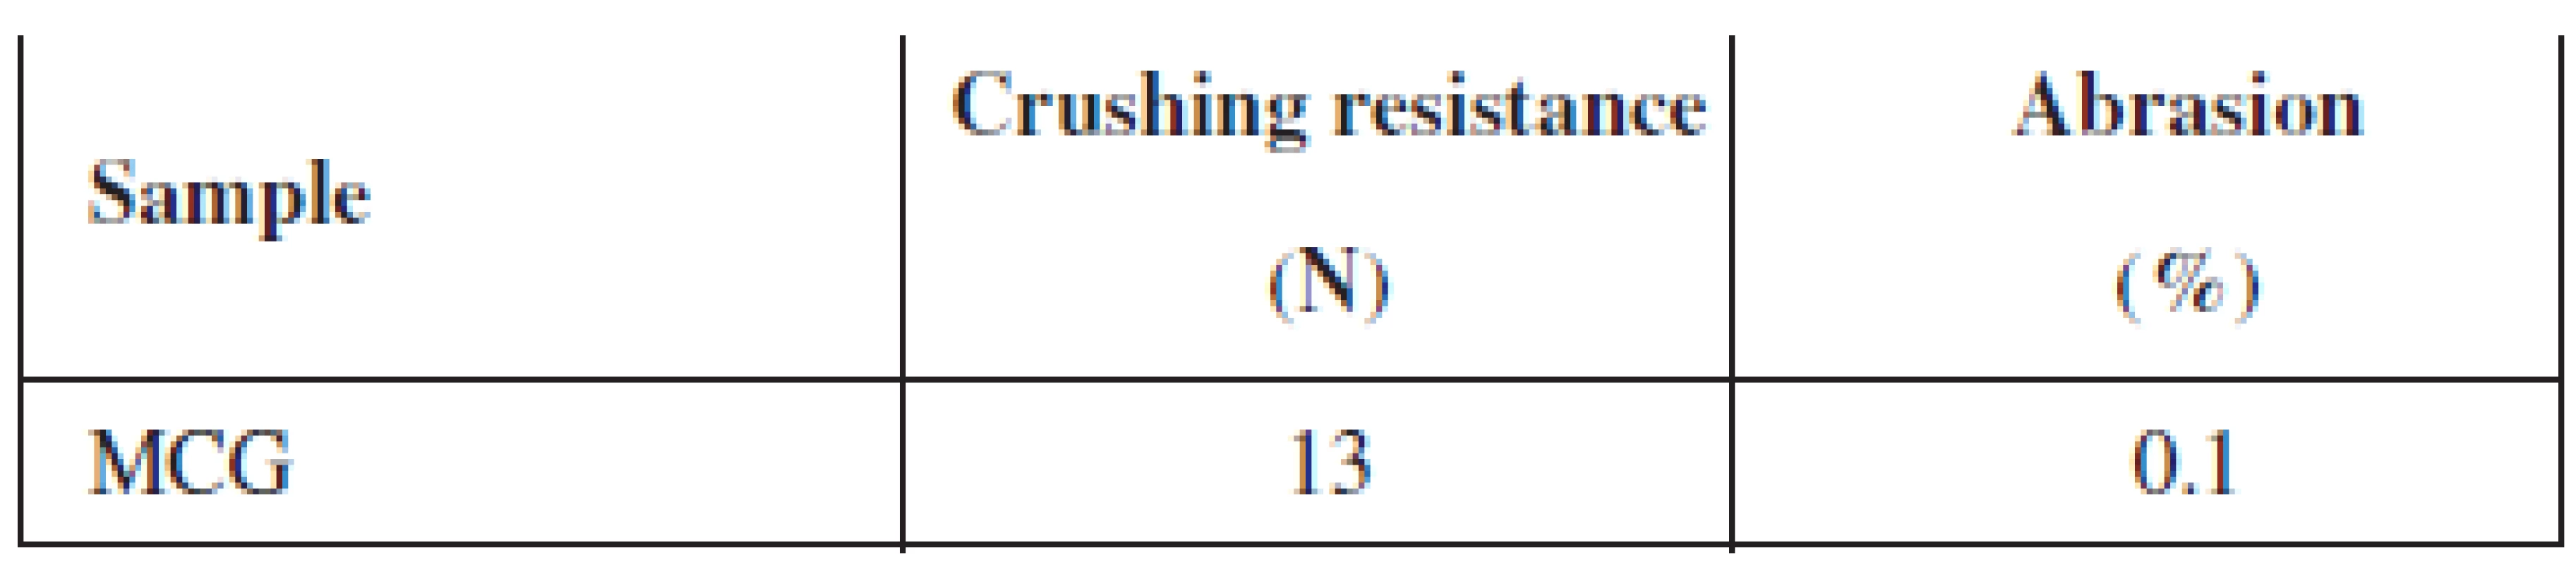 Crushing and abrasion resistance of MCGs